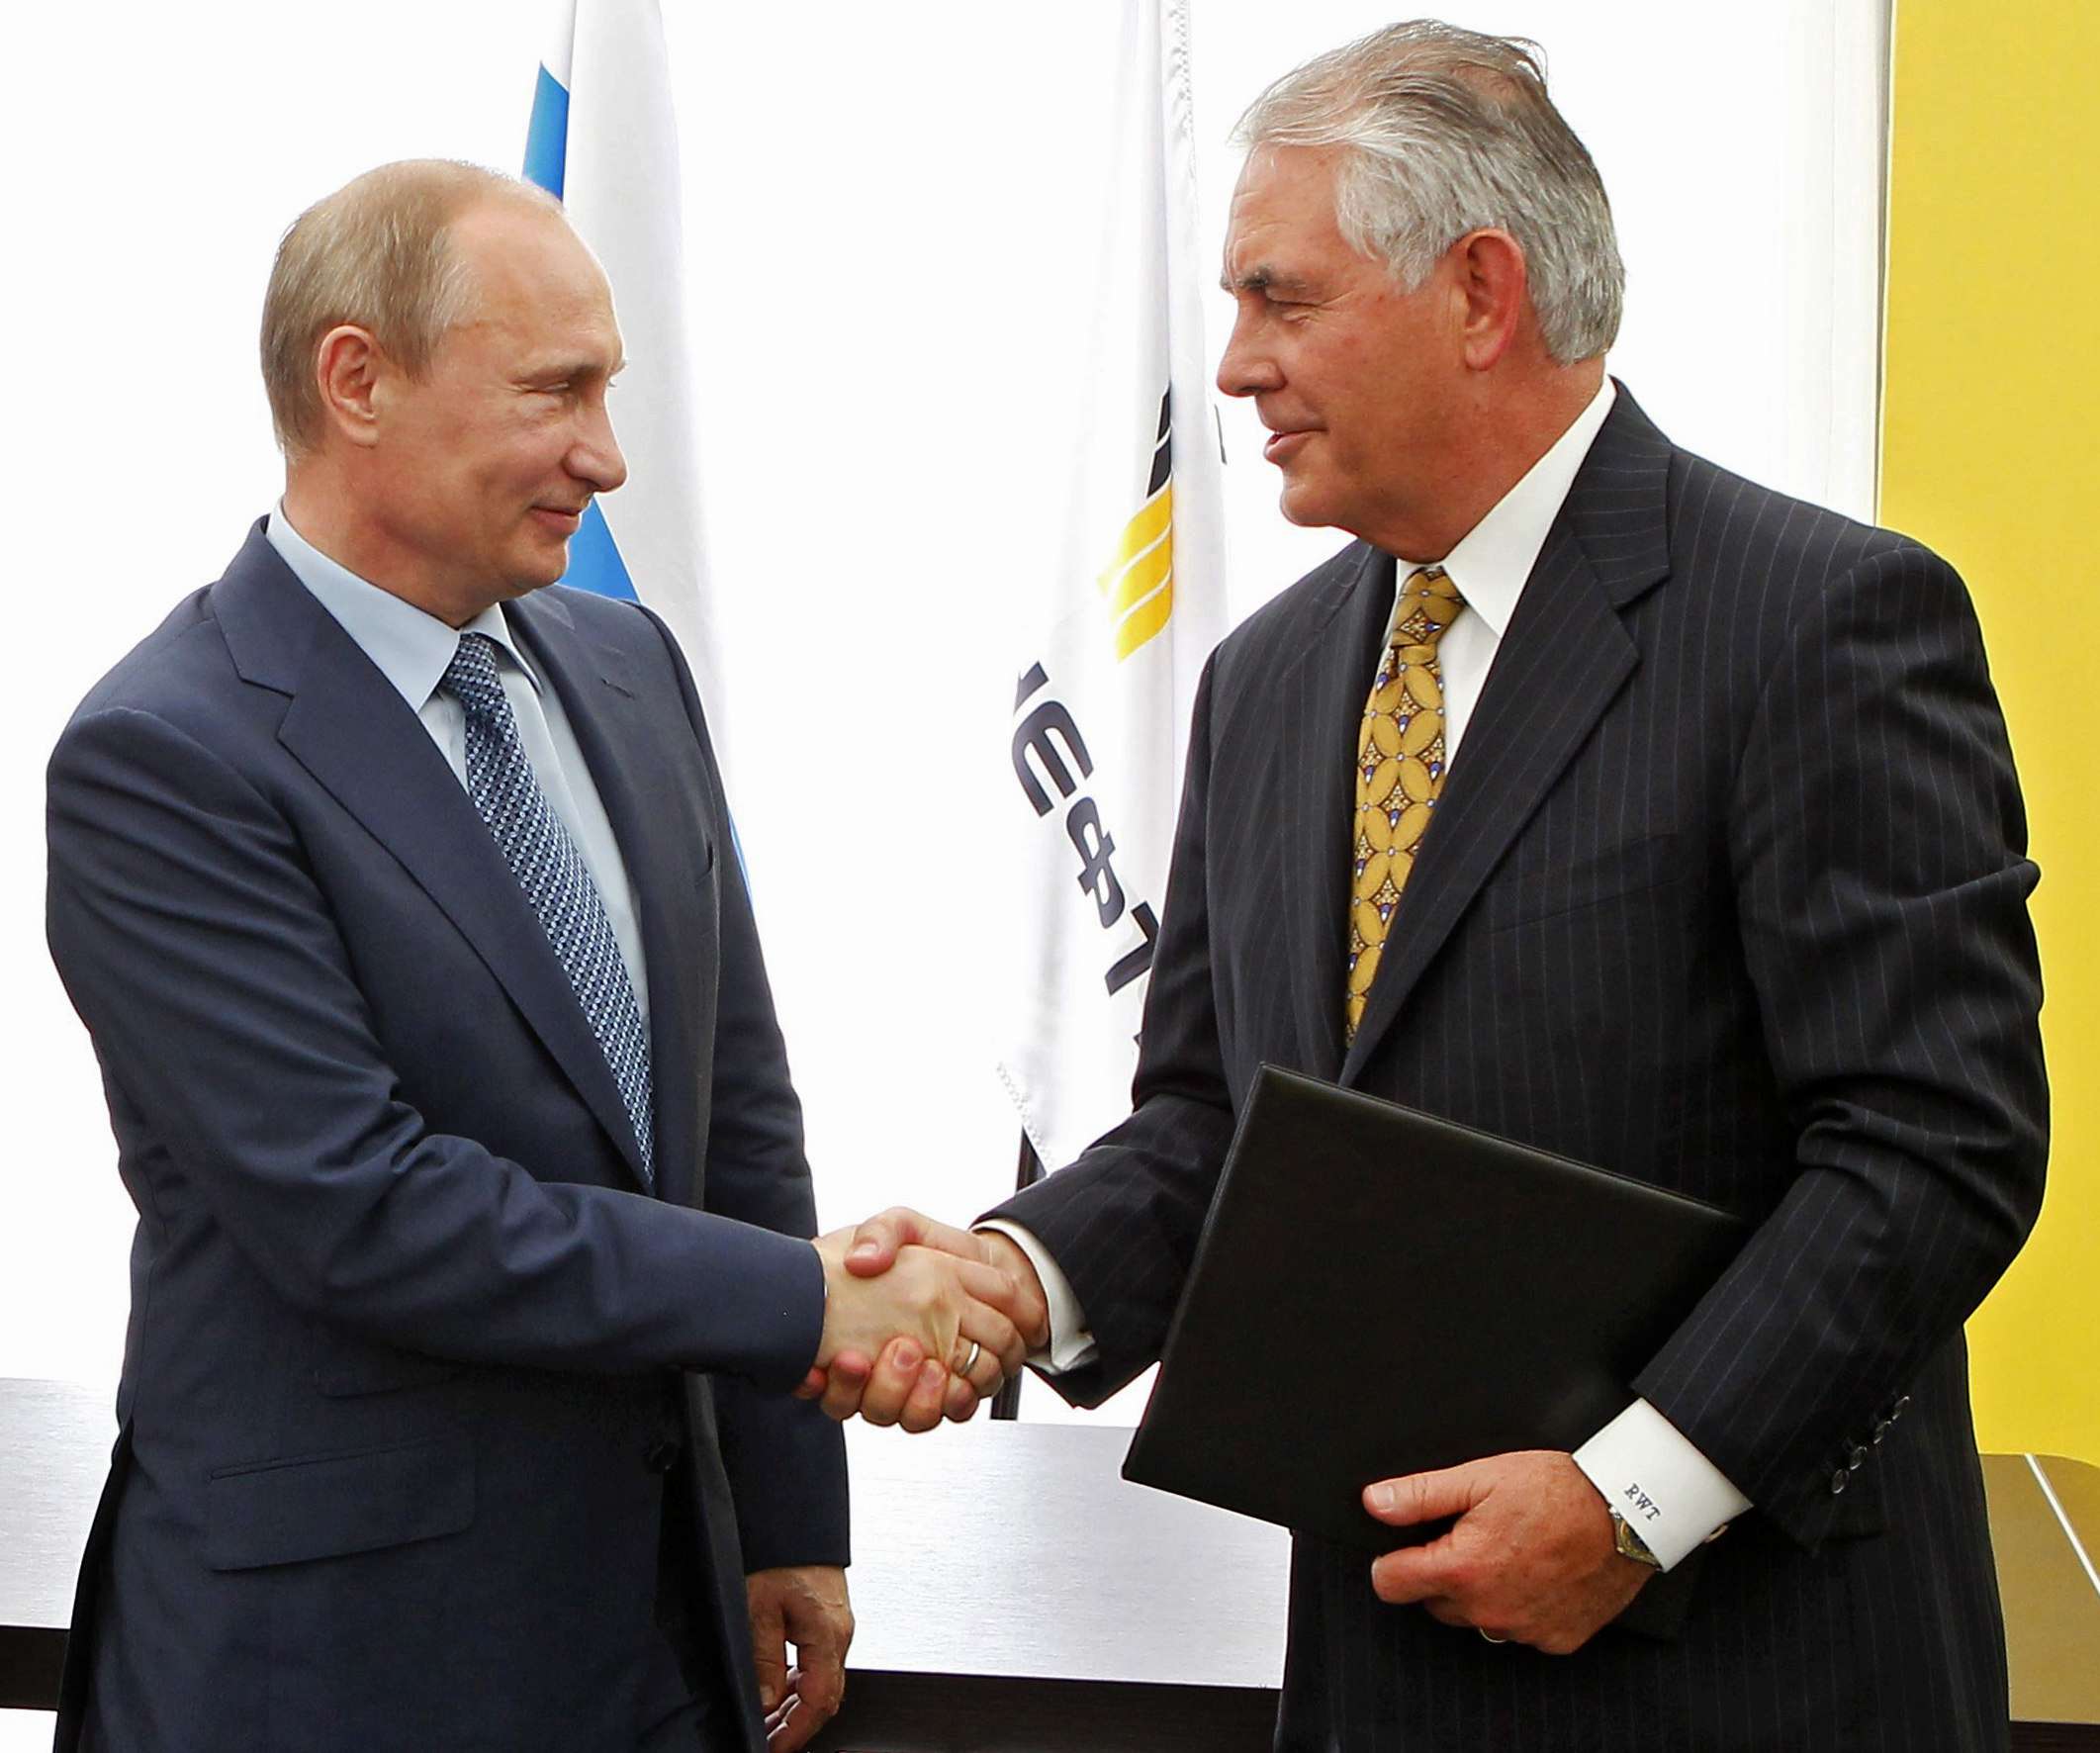 Russian President Vladimir Putin and Exxon Mobil CEO Rex Tillerson, now US secretary of state-designate, at the signing ceremony for an agreement with Russia’s Rosneft, at the Black Sea port of Tuapse, southern Russia, in 2012. Photo: AP